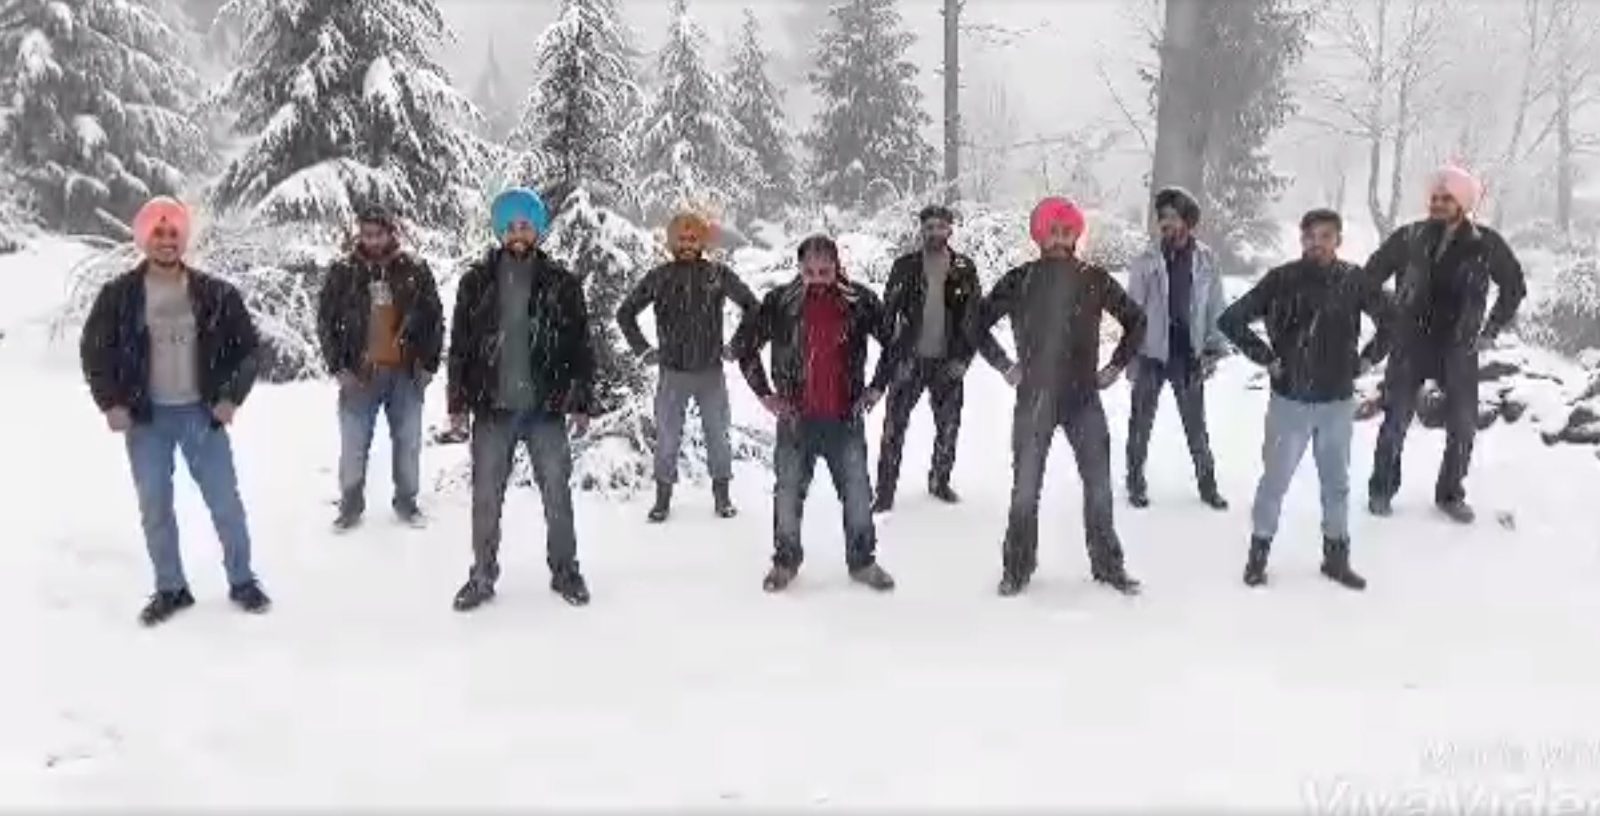 Bhangra Performance in Solang Valley is Making People Fall in Love with Snowfall